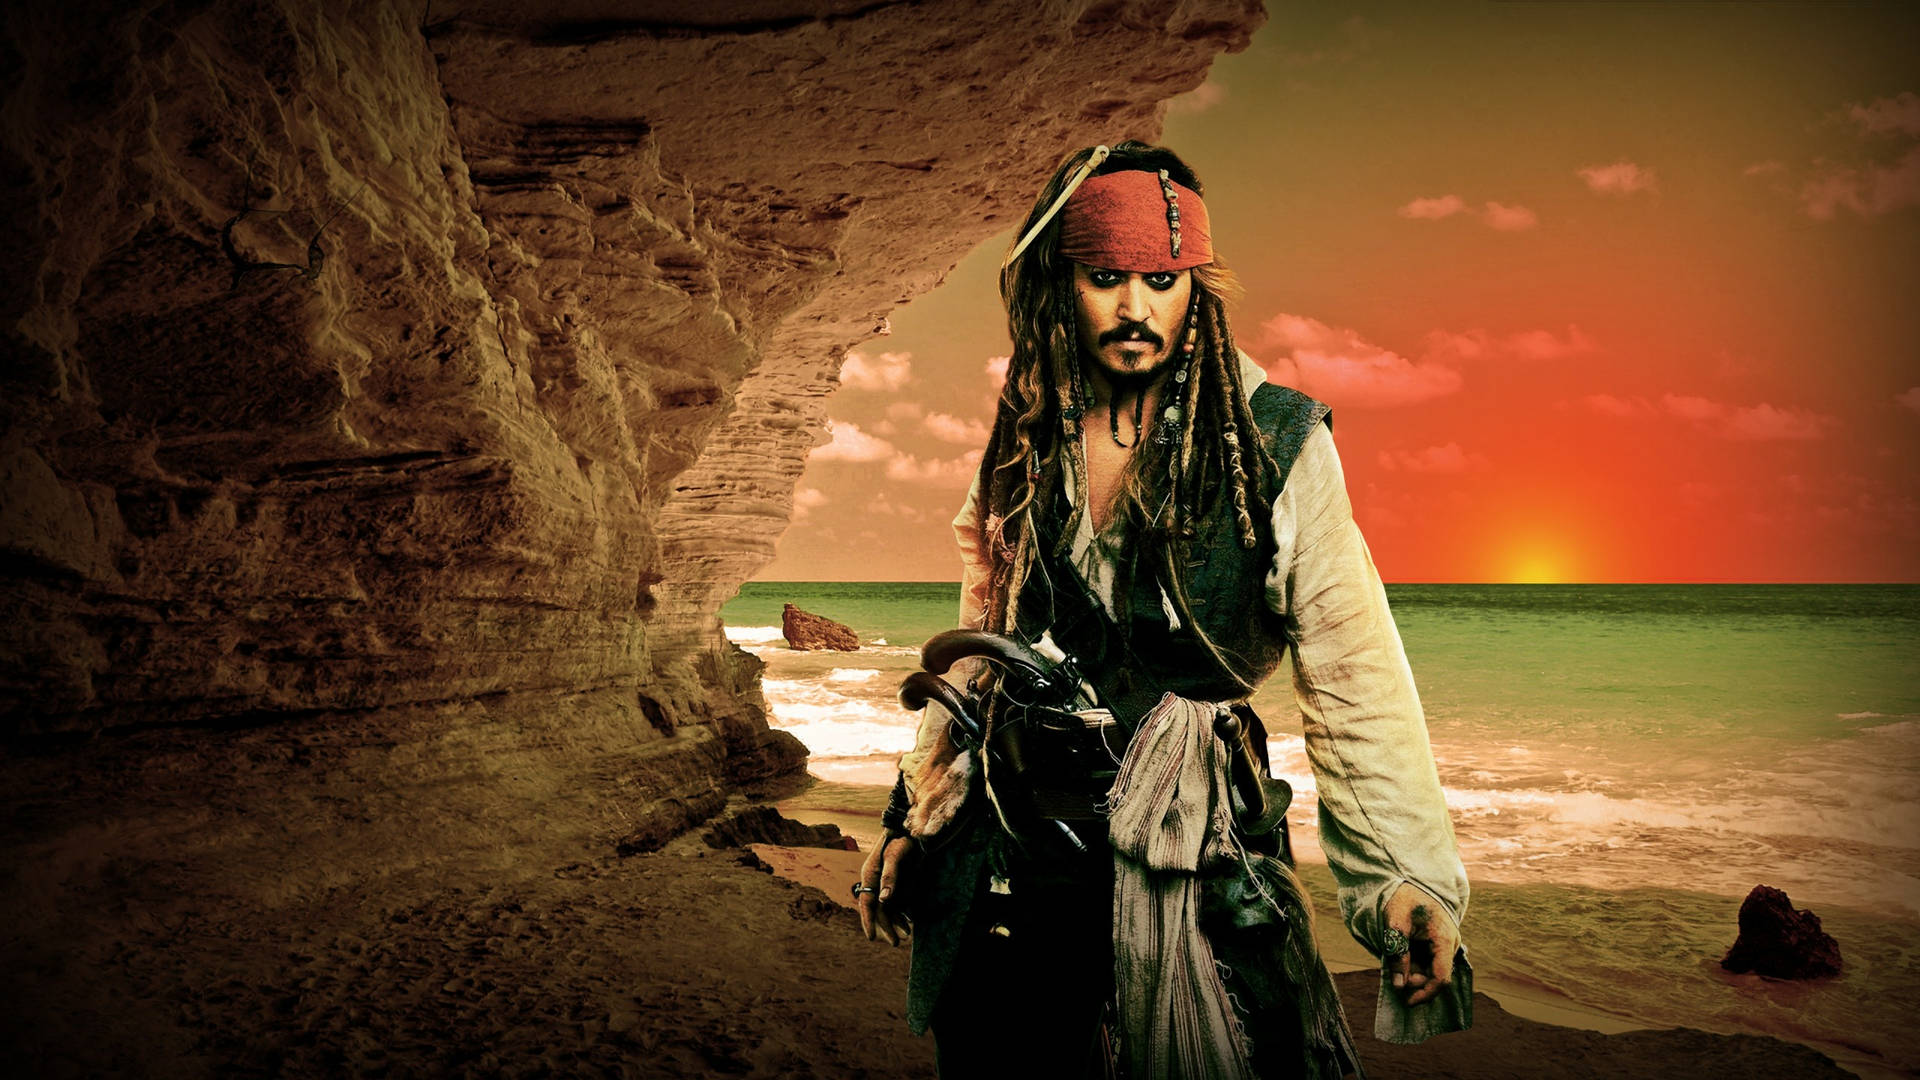 Pirates Of The Caribbean Angry Jack Sparrow